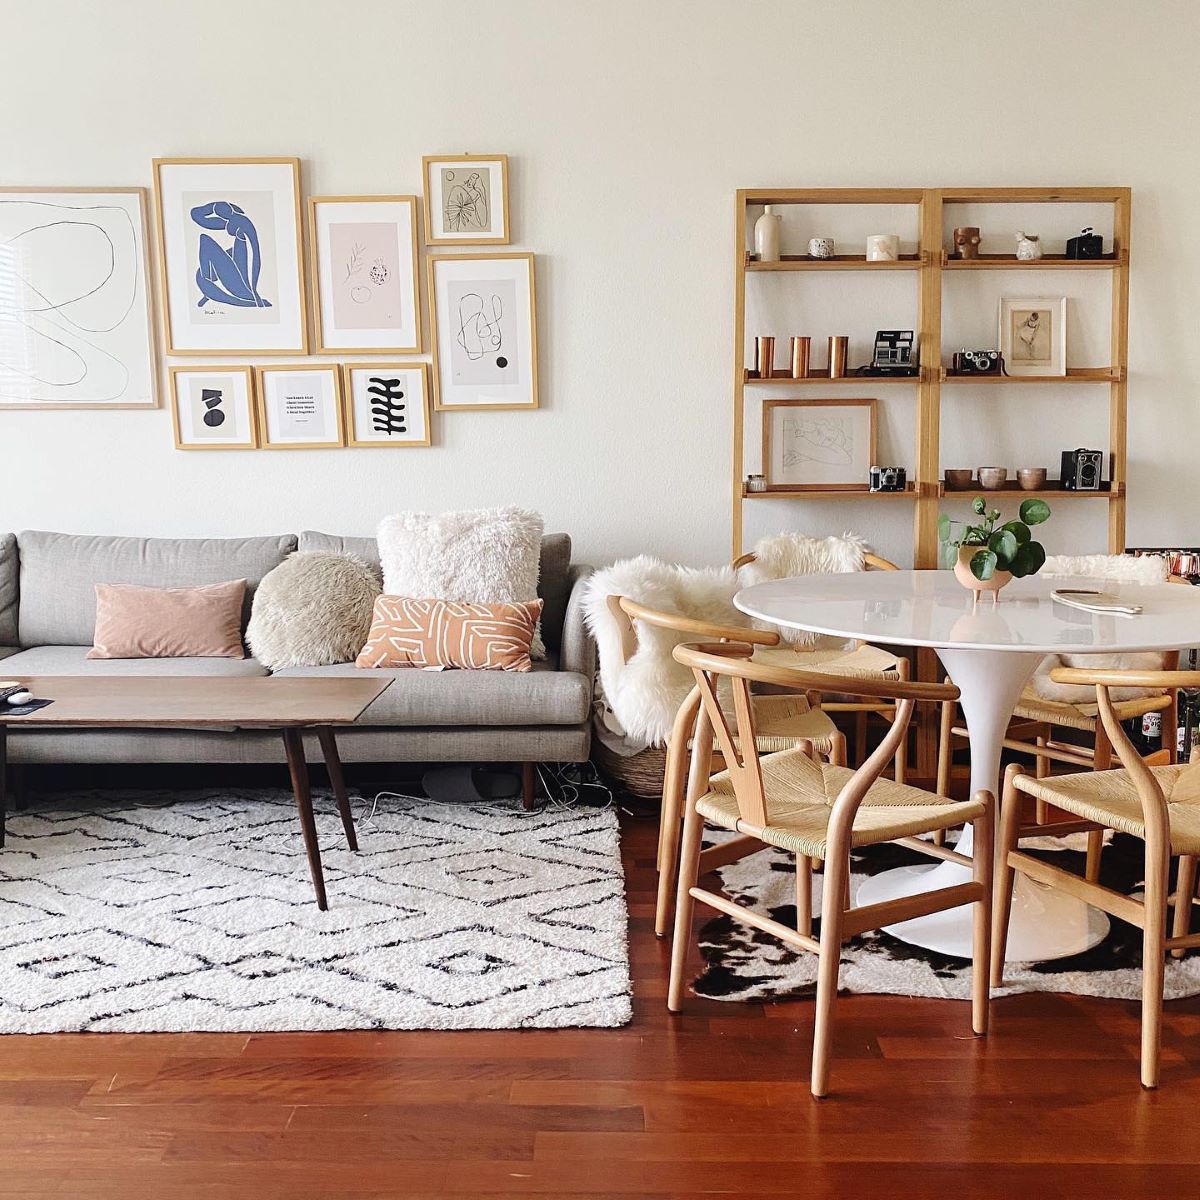 How To Match Rugs In An Open Floor Plan